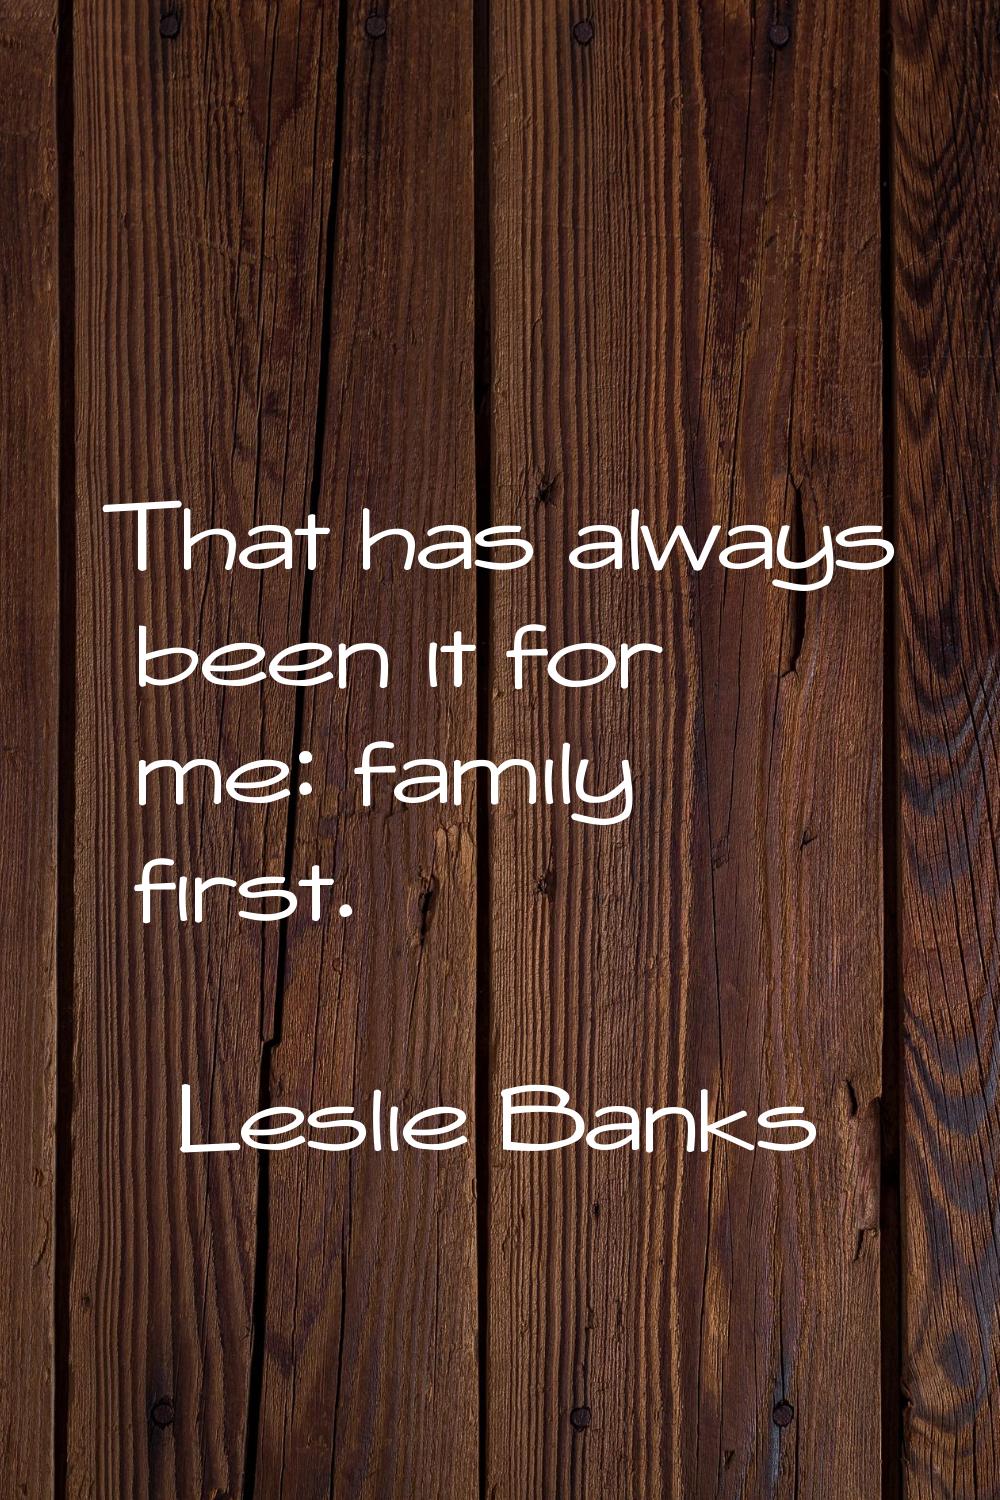 That has always been it for me: family first.